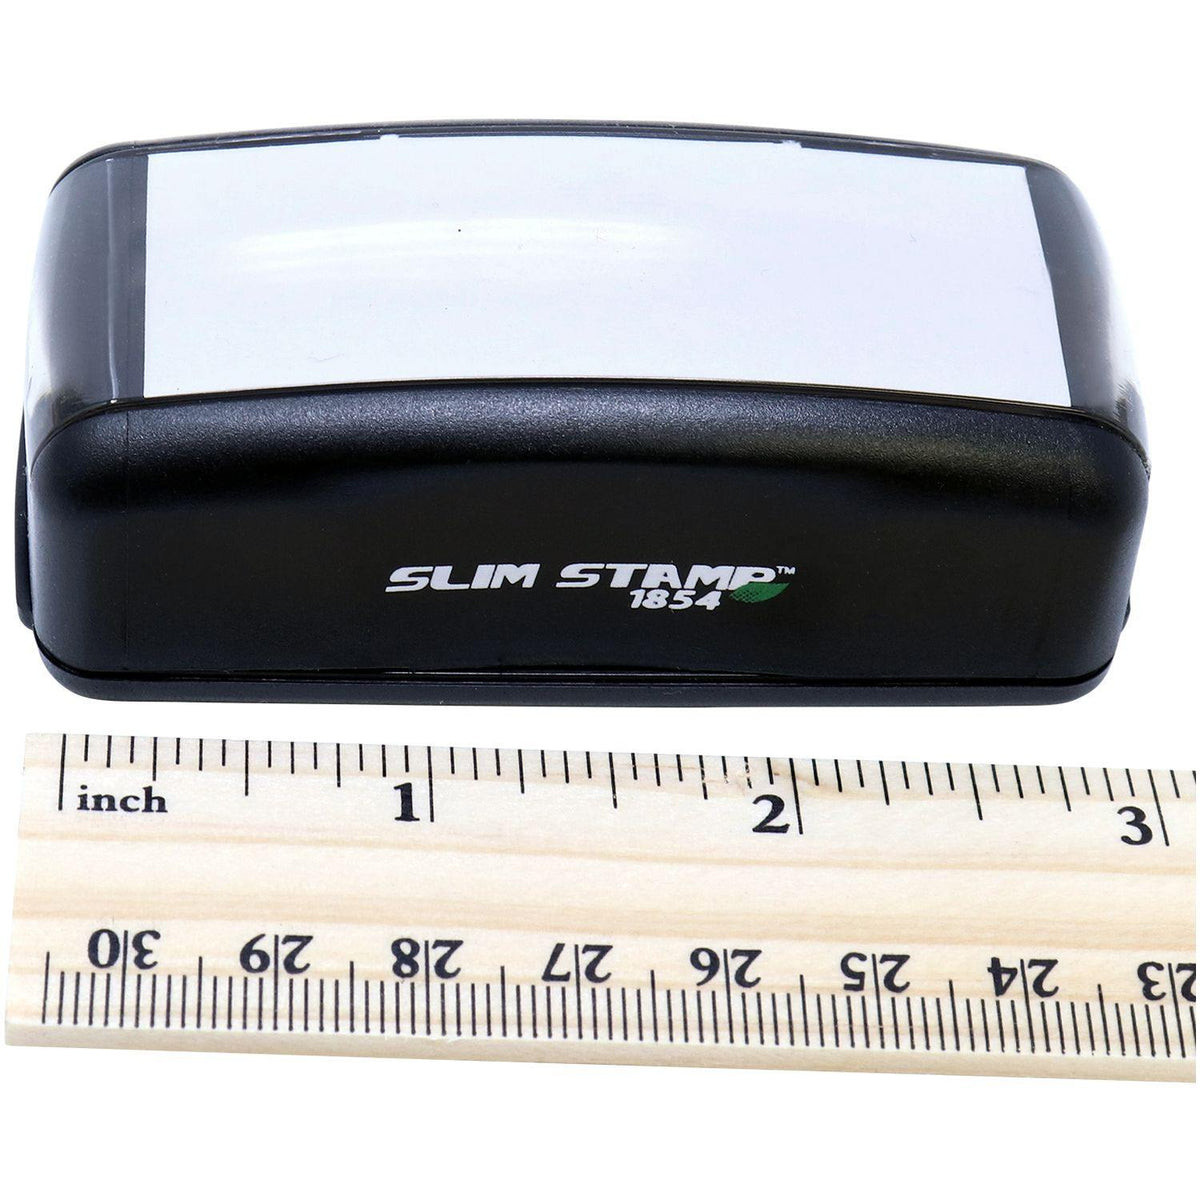 Measurement Large Pre Inked Savings Cds Stamp with Ruler